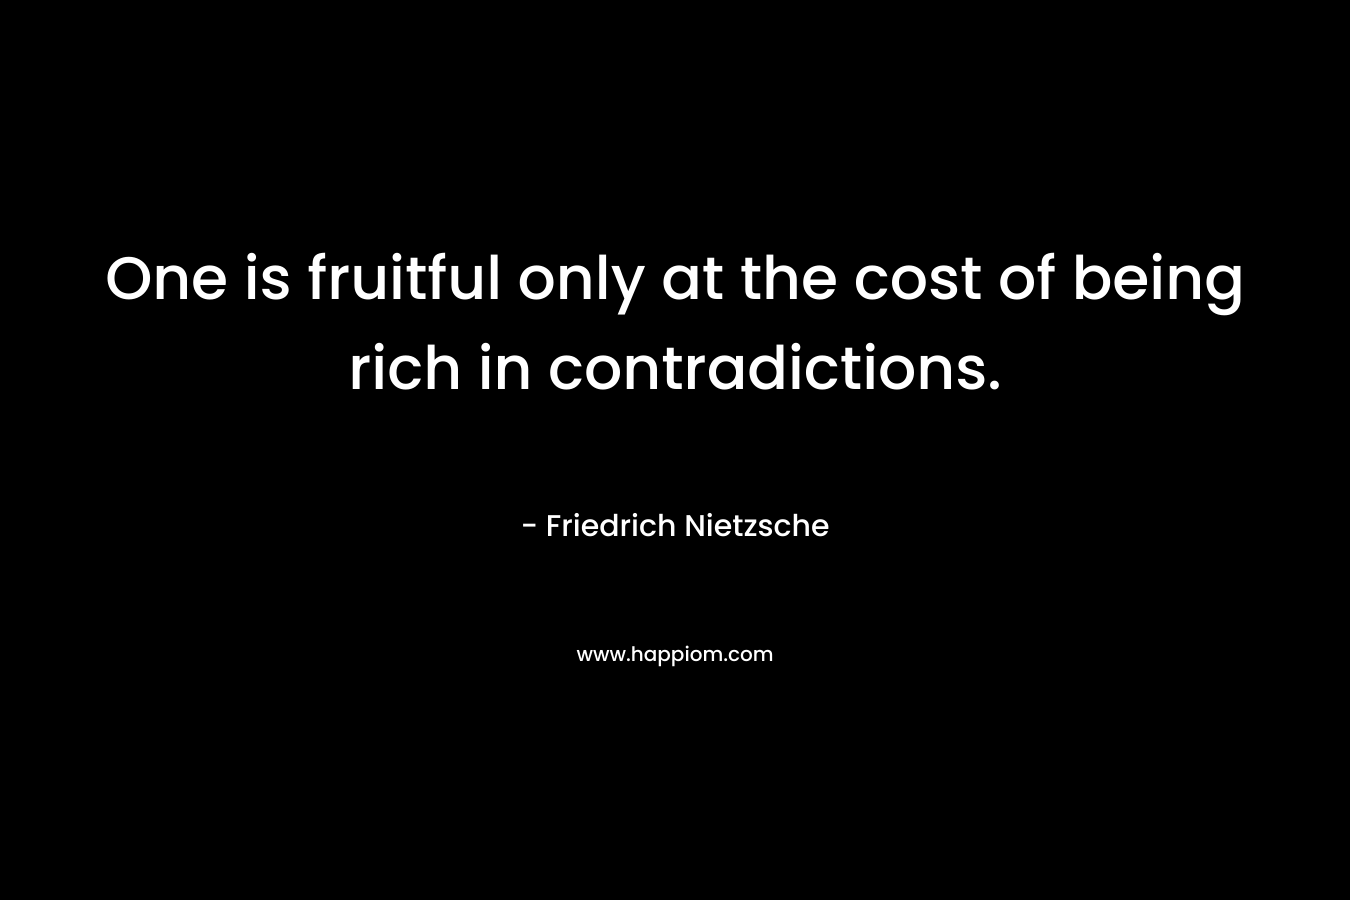 One is fruitful only at the cost of being rich in contradictions. – Friedrich Nietzsche